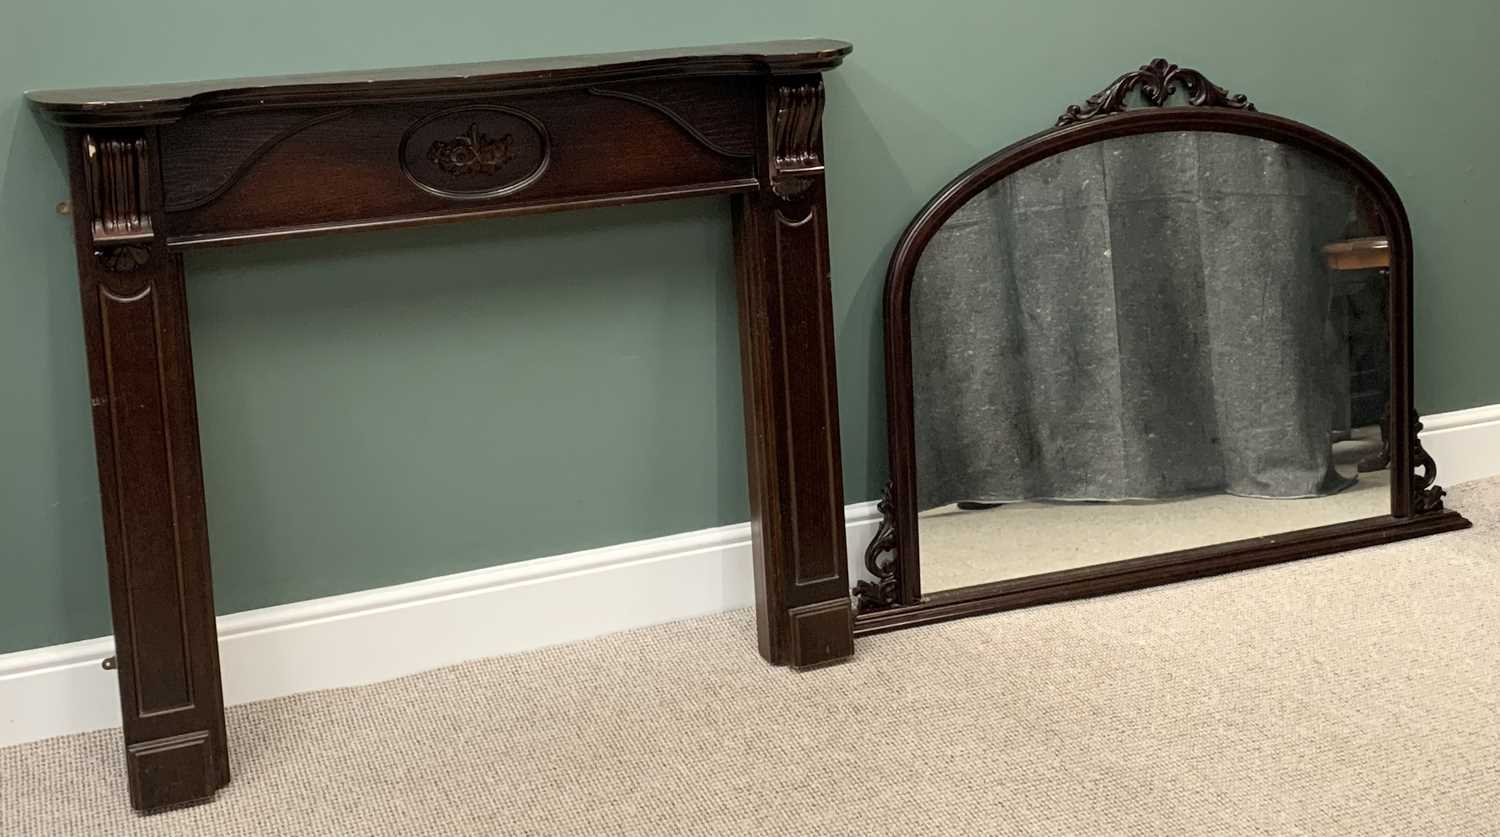 FIRE SURROUND & SIMILAR STYLE OVERMANTLE MIRROR, the surround 110cms H, 131cms W, 27cms D, the